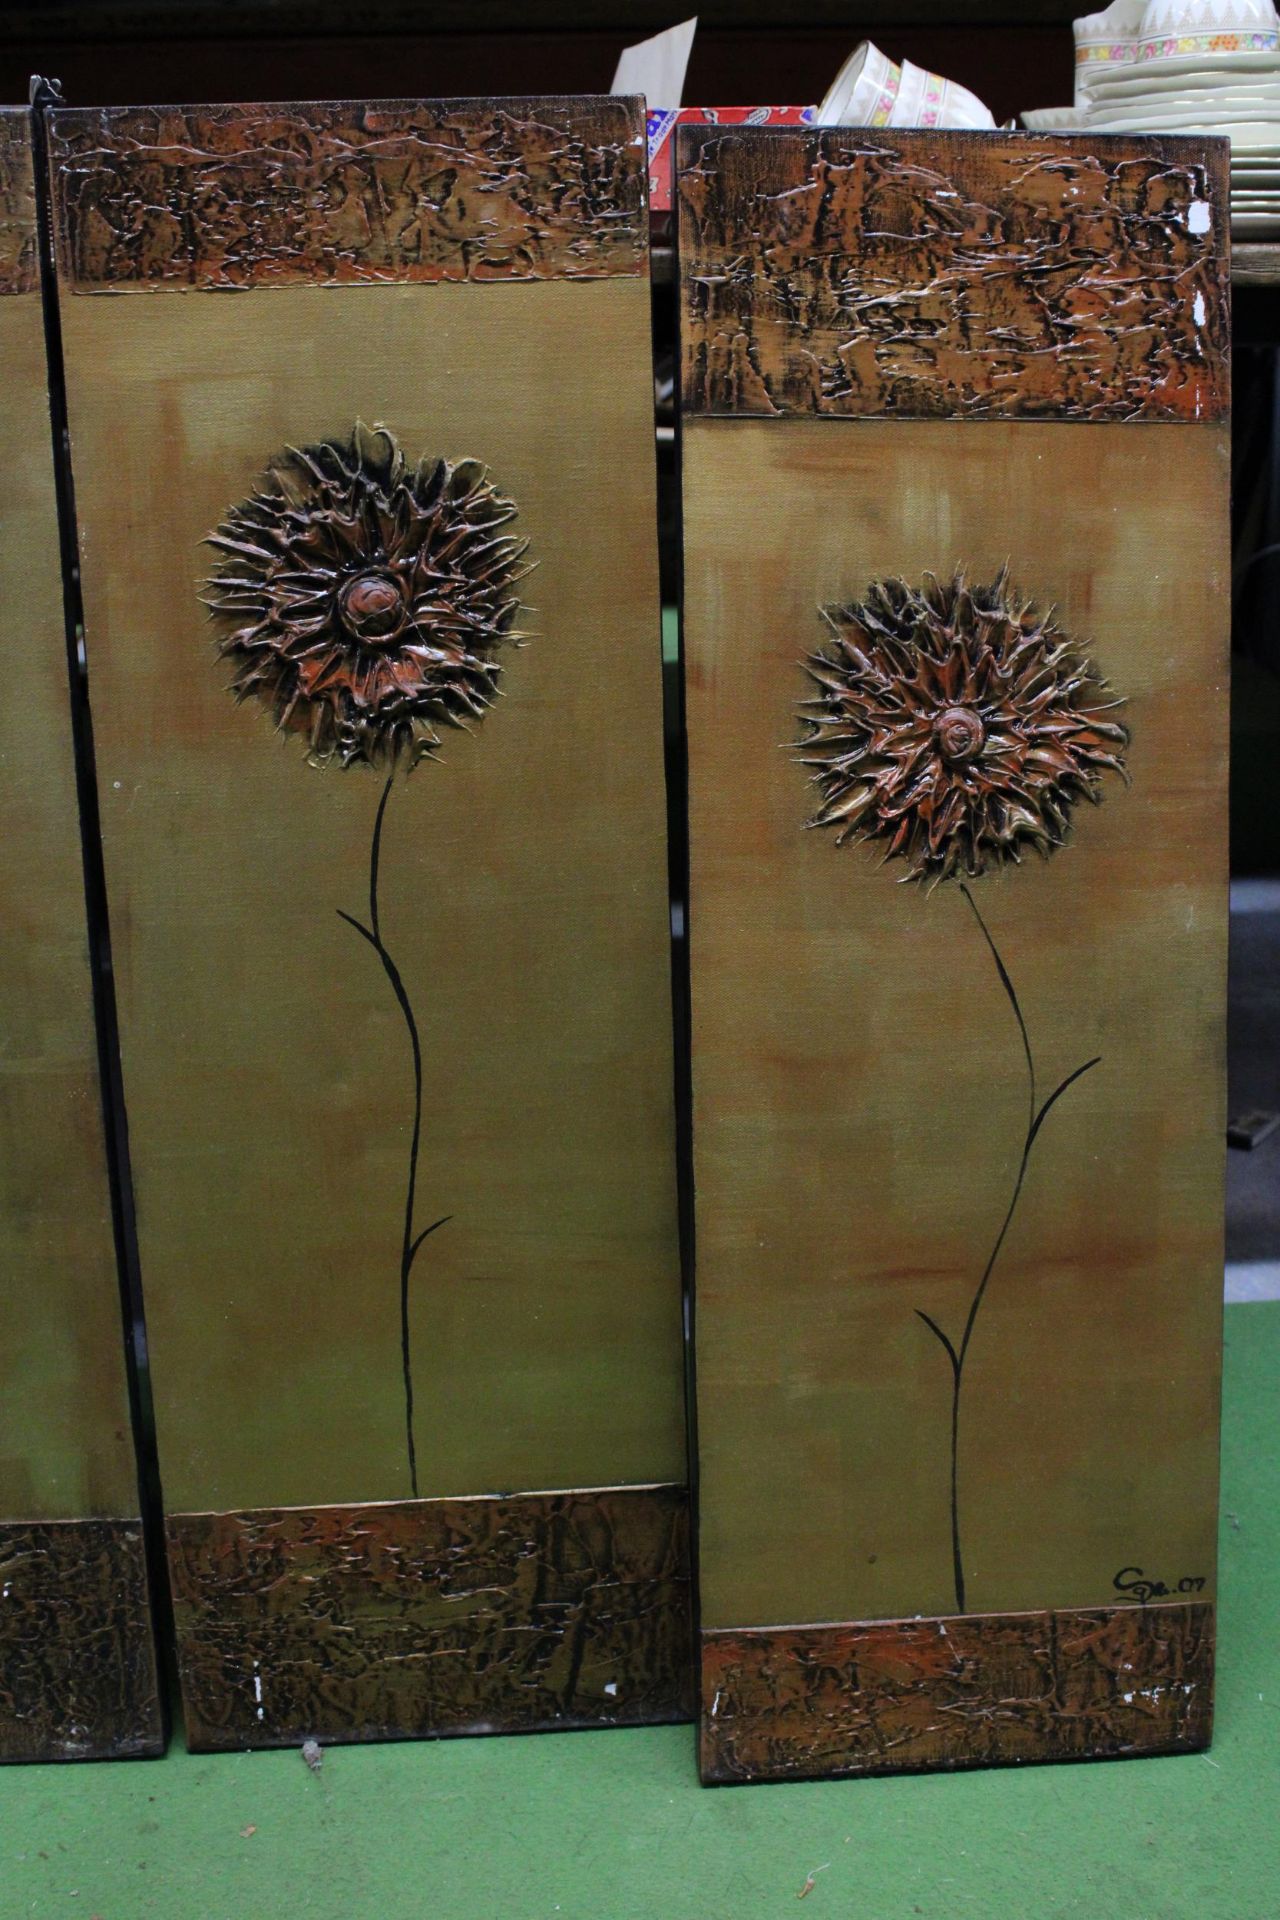 A SET OF FOUR "SUNFLOWERS" BY GABRIELA STAUFFER - FEB 2007 - Image 2 of 3